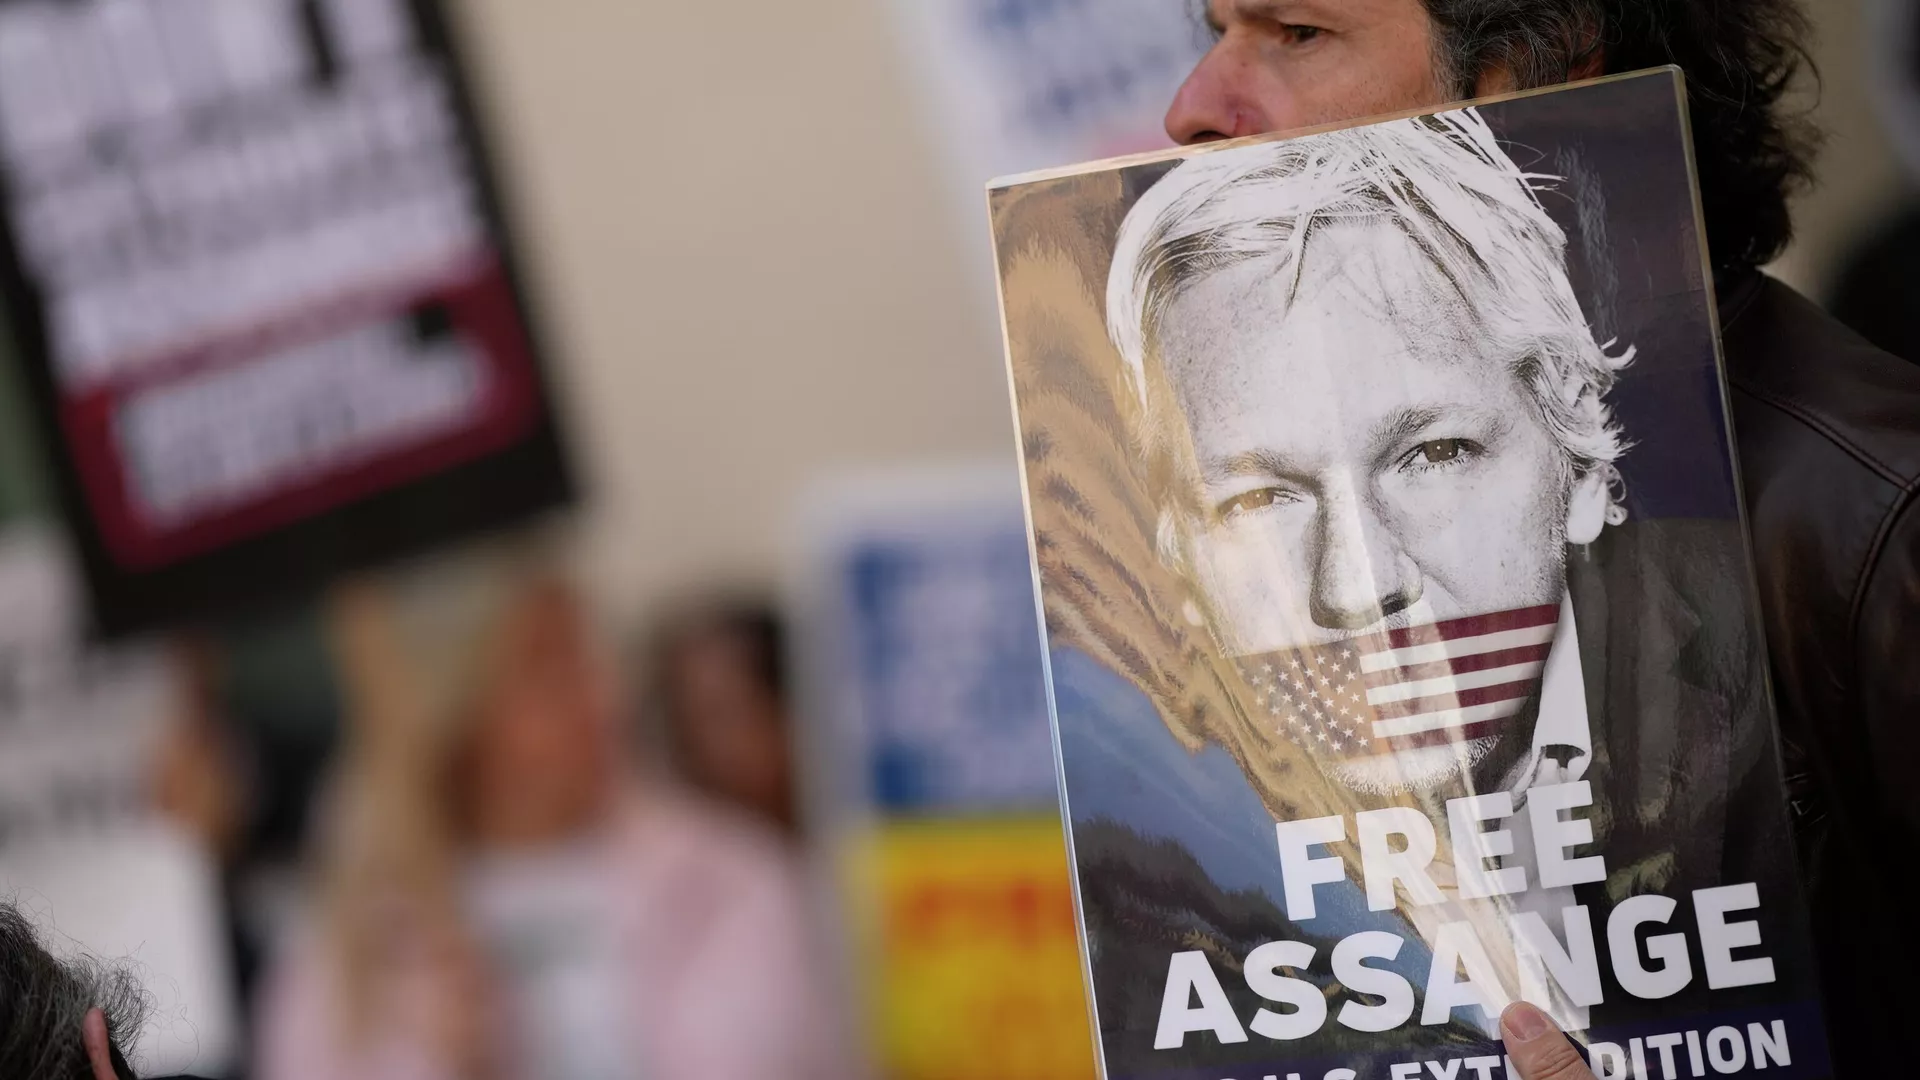 Journalists and Activists Gather in DC, Call for Assange’s Release on 4-Year Anniversary of Arrest